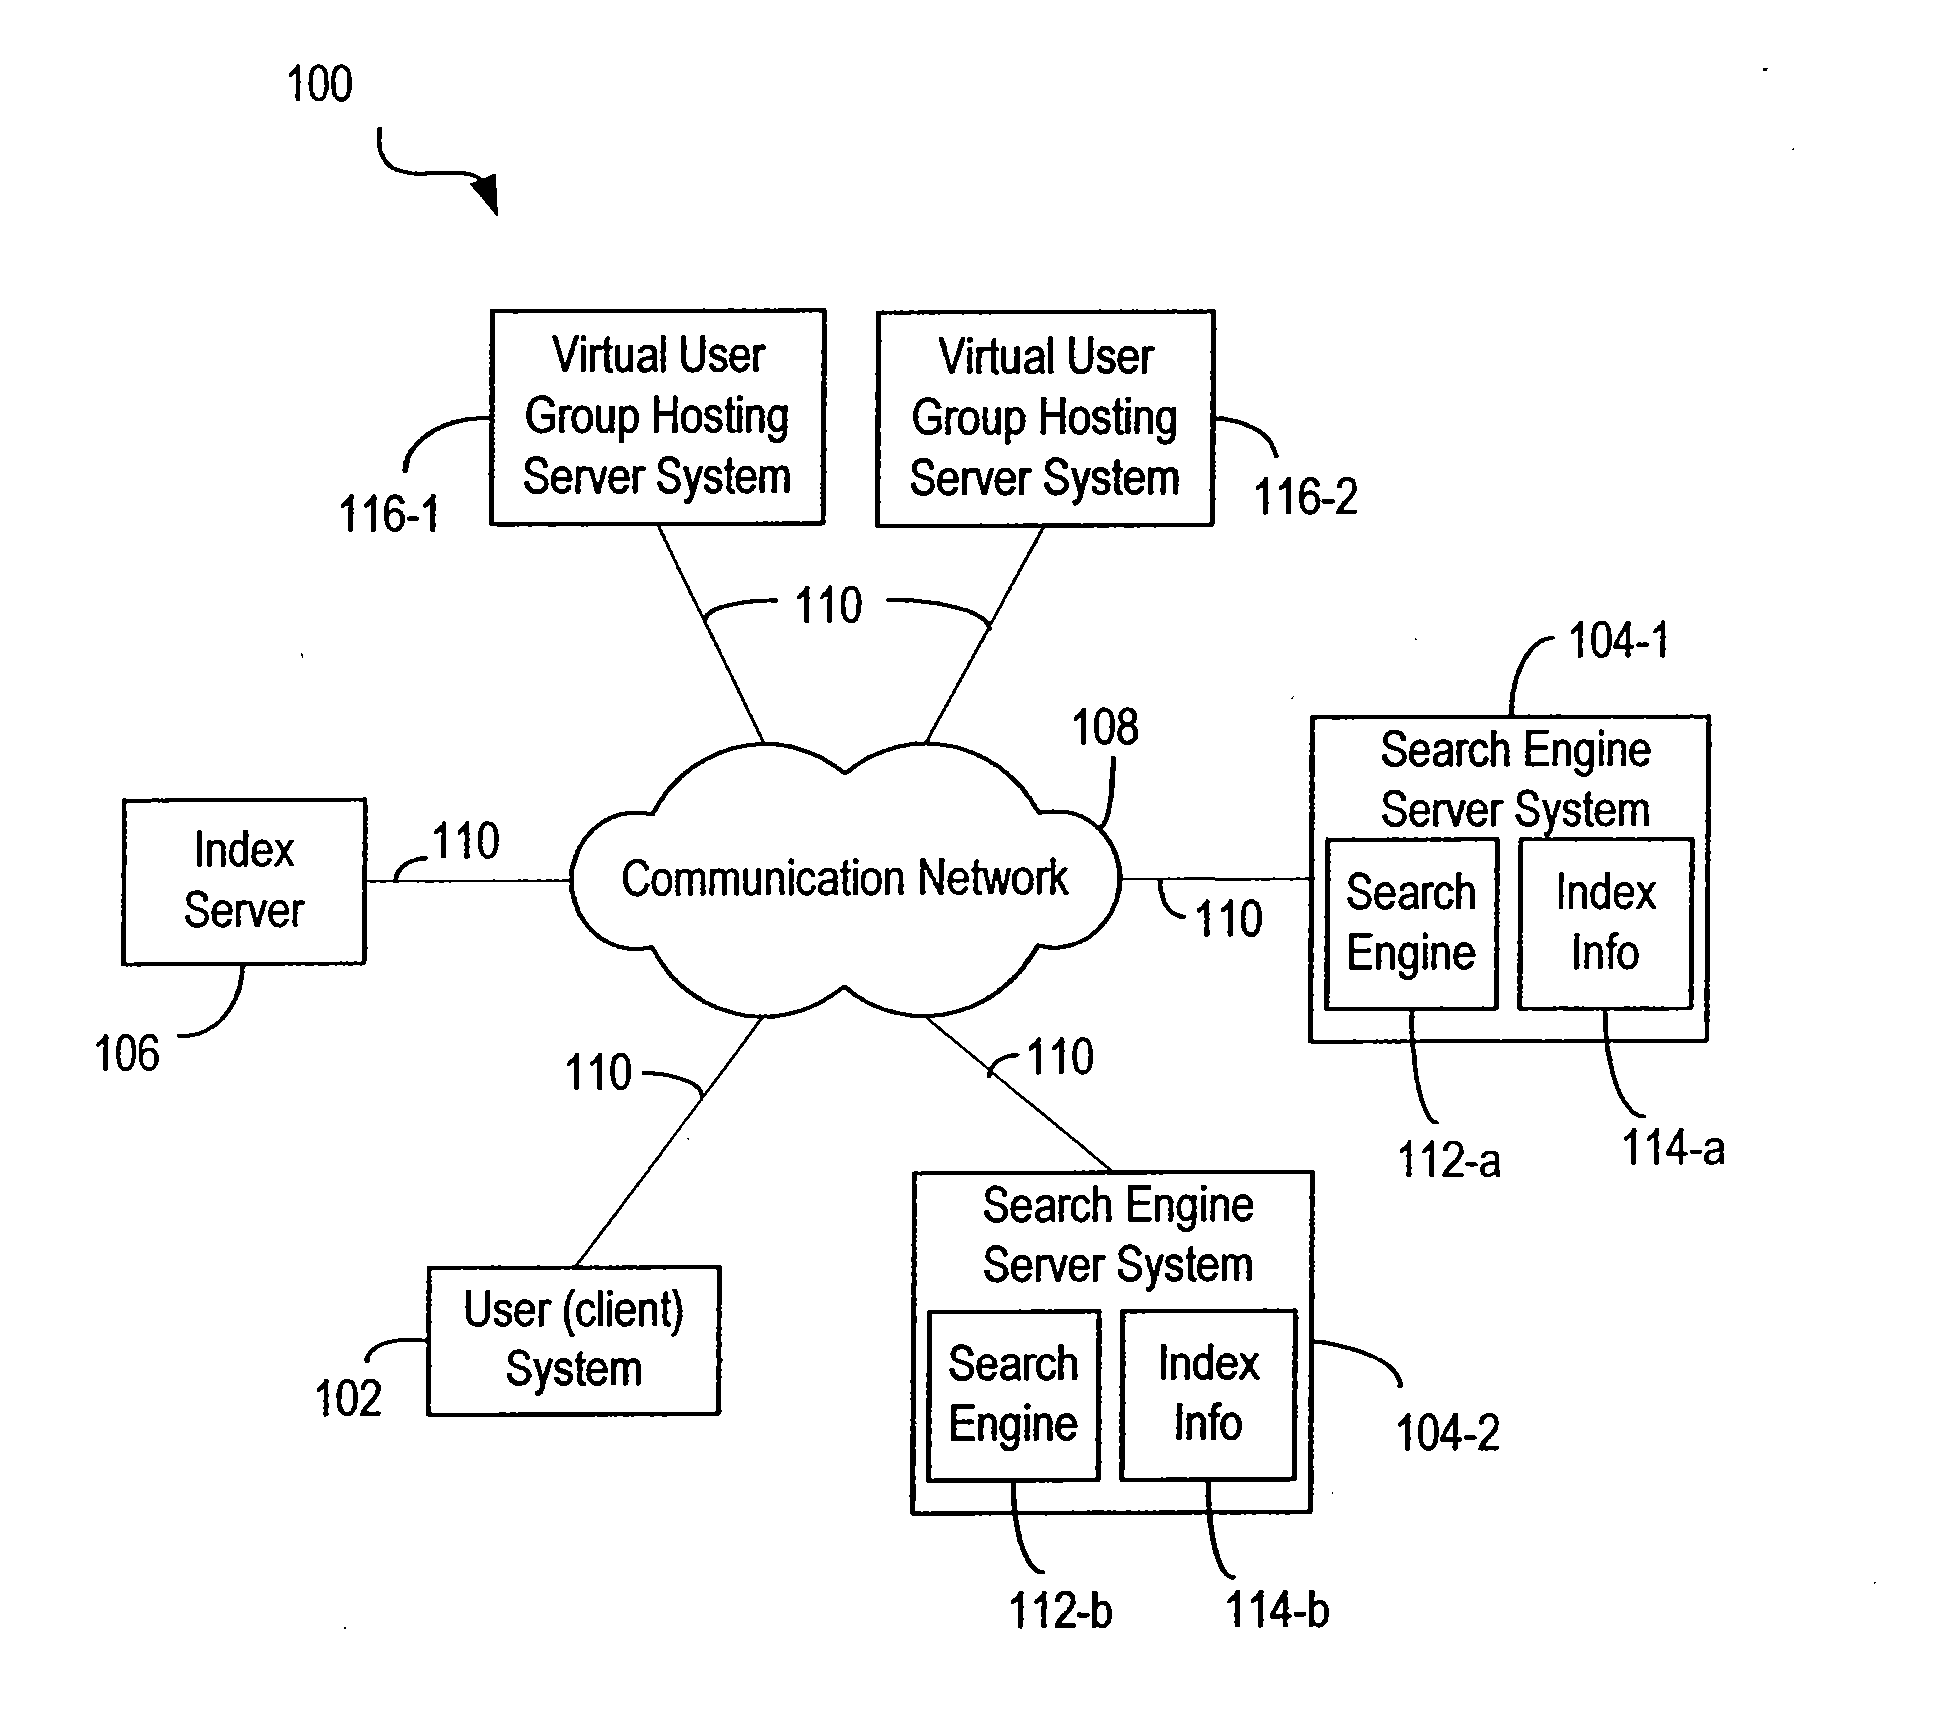 Techniques for sharing content information with members of a virtual user group in a network environment without compromising user privacy